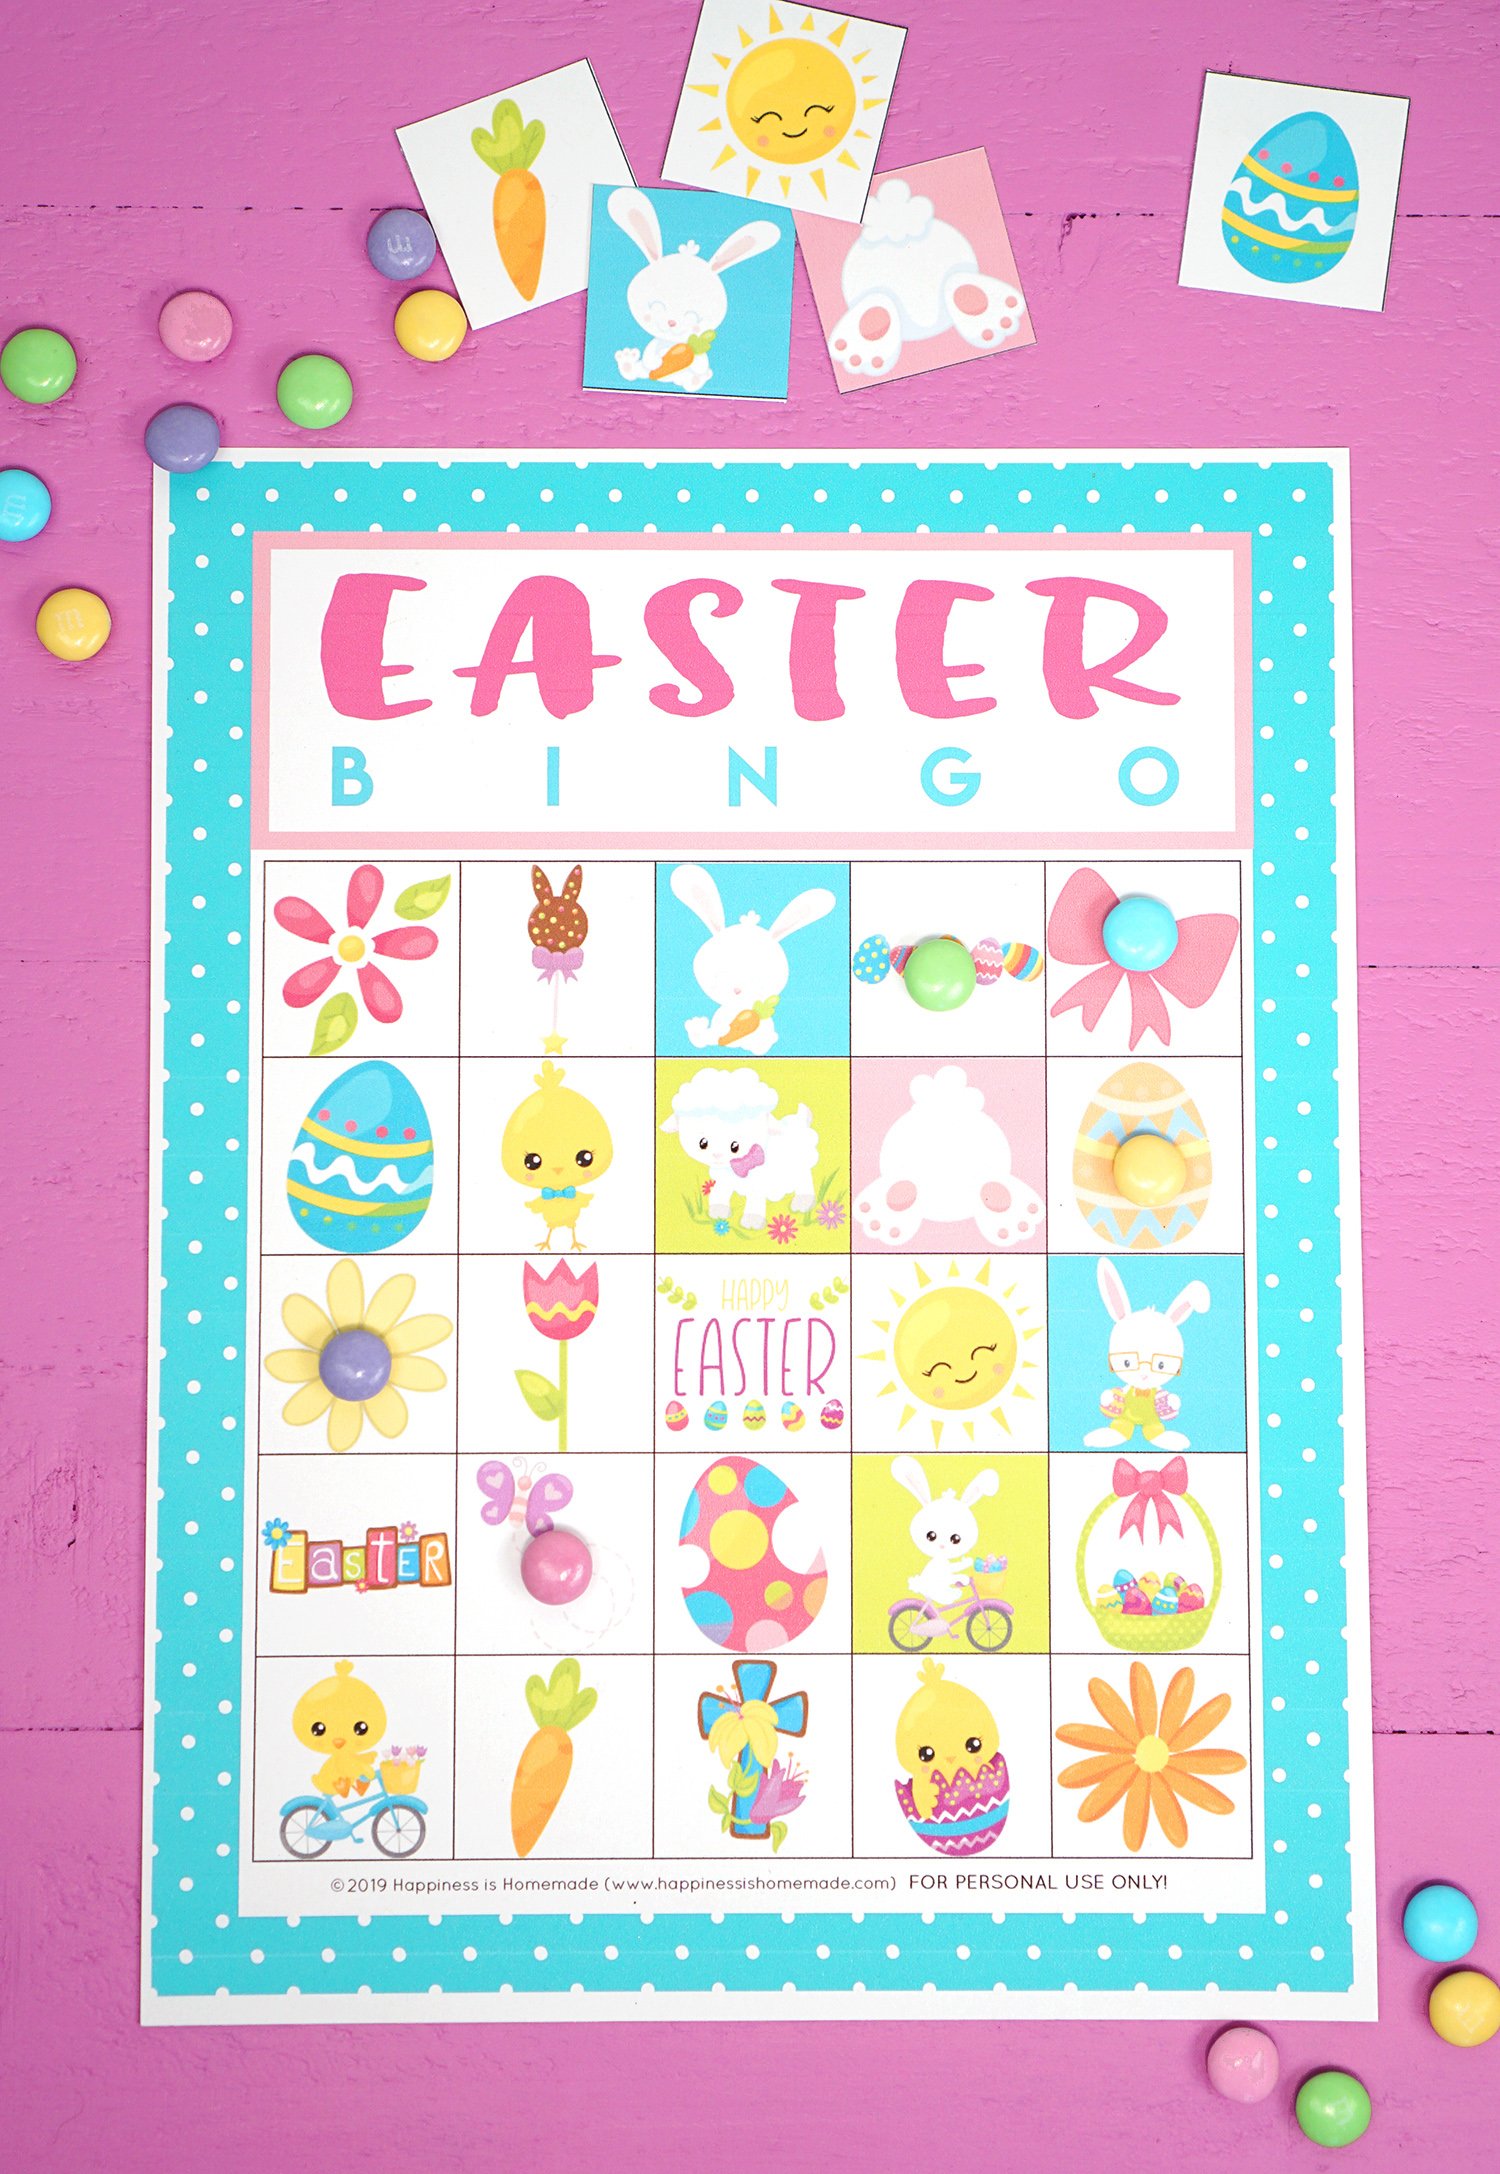 FREE Printable Easter Bingo Game Cards Happiness is Homemade